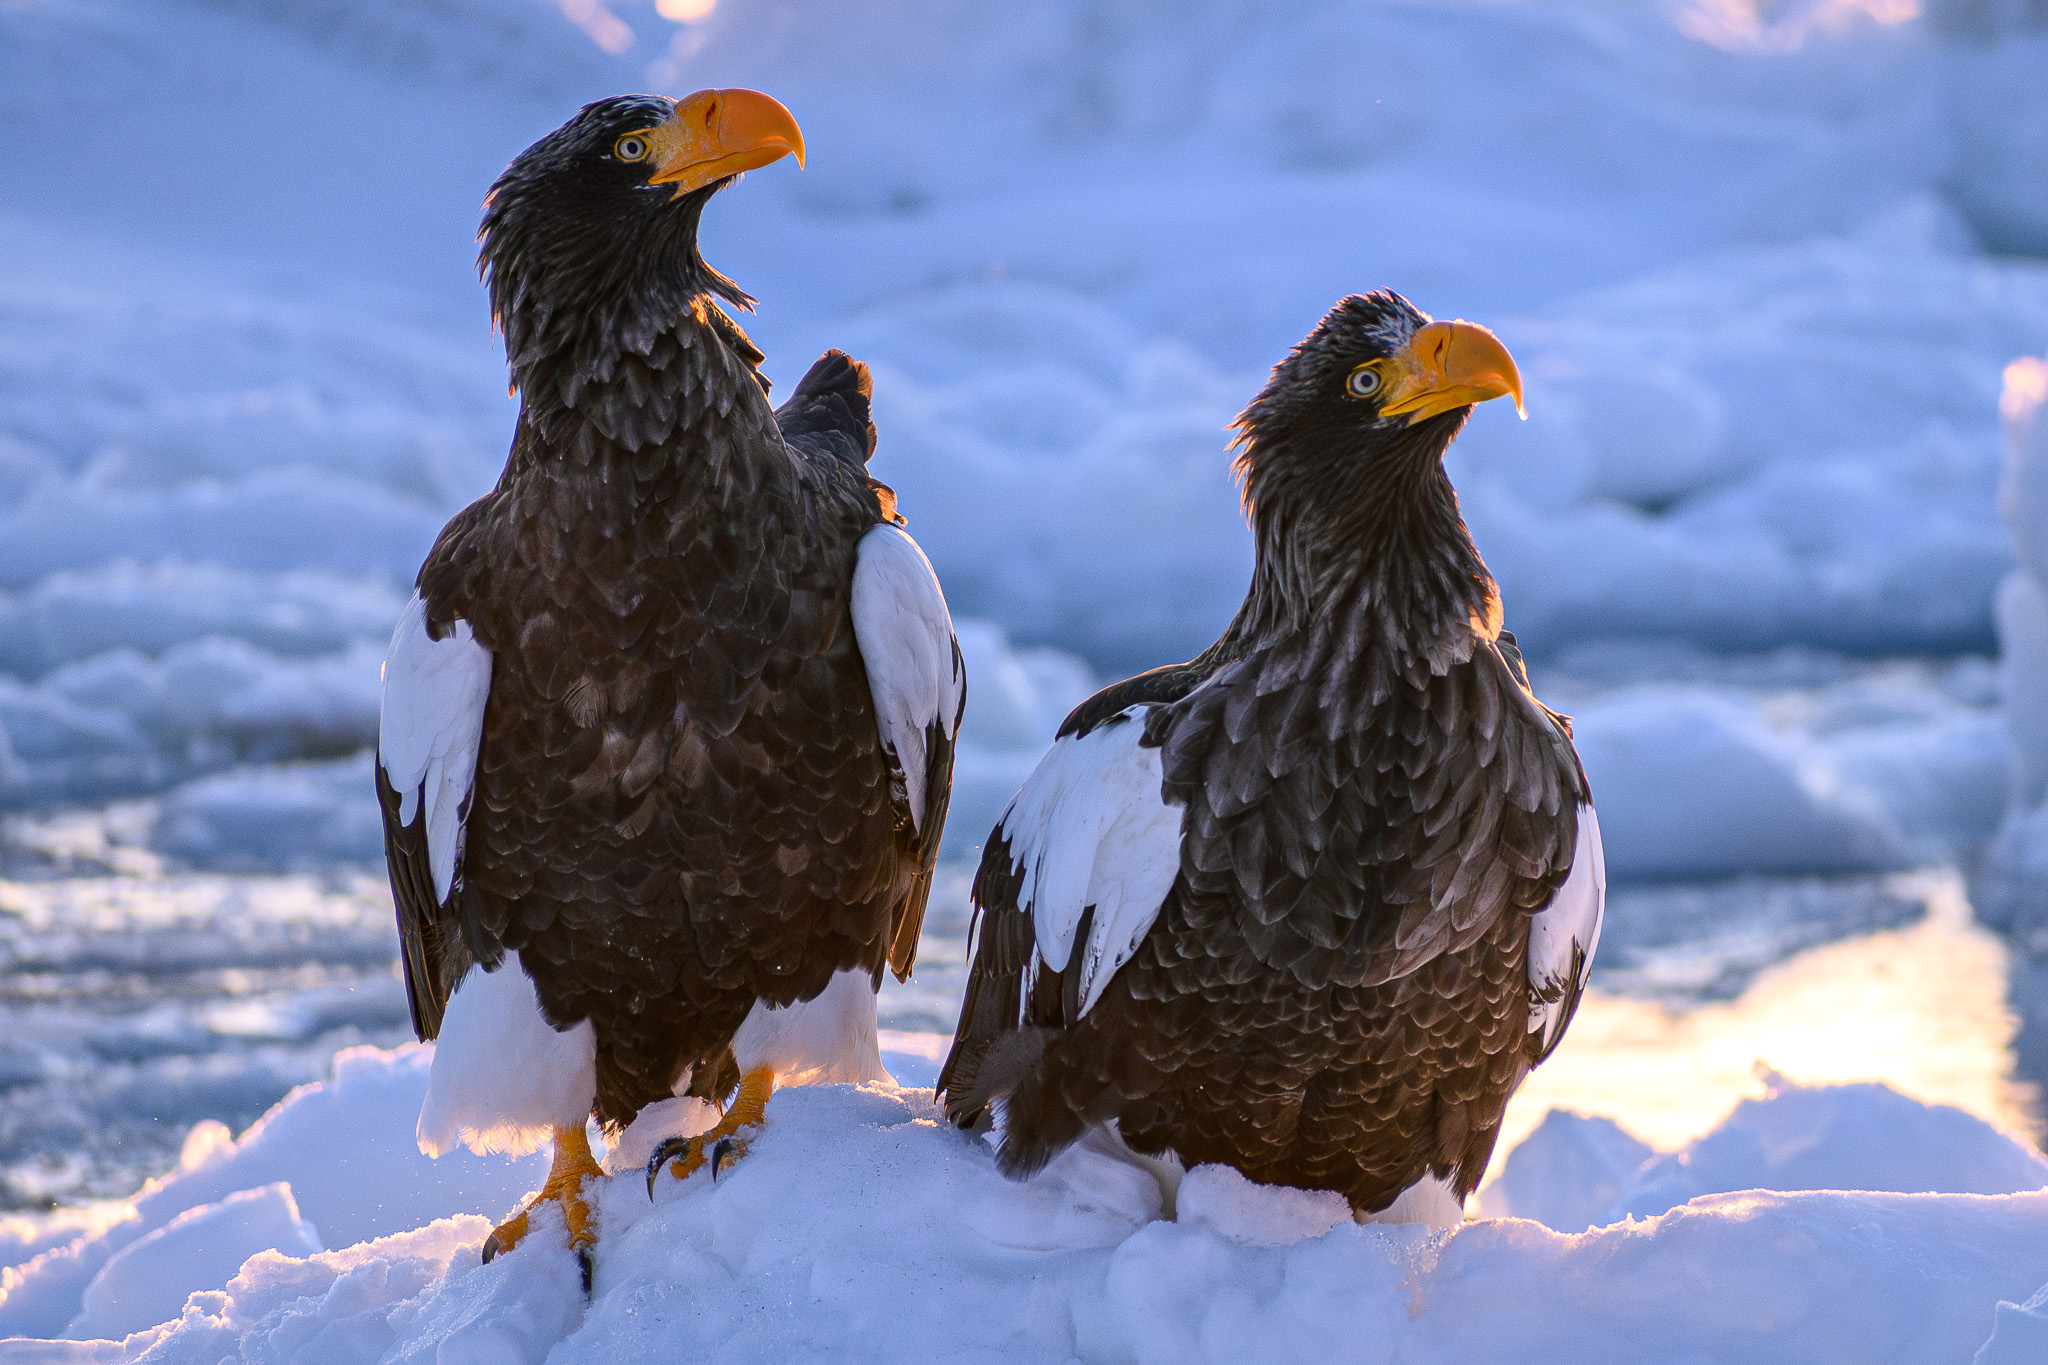 A close-up of two Steller's Sea Eagles perched on an ice flow in the ocean. They are both looking up at something overhead.